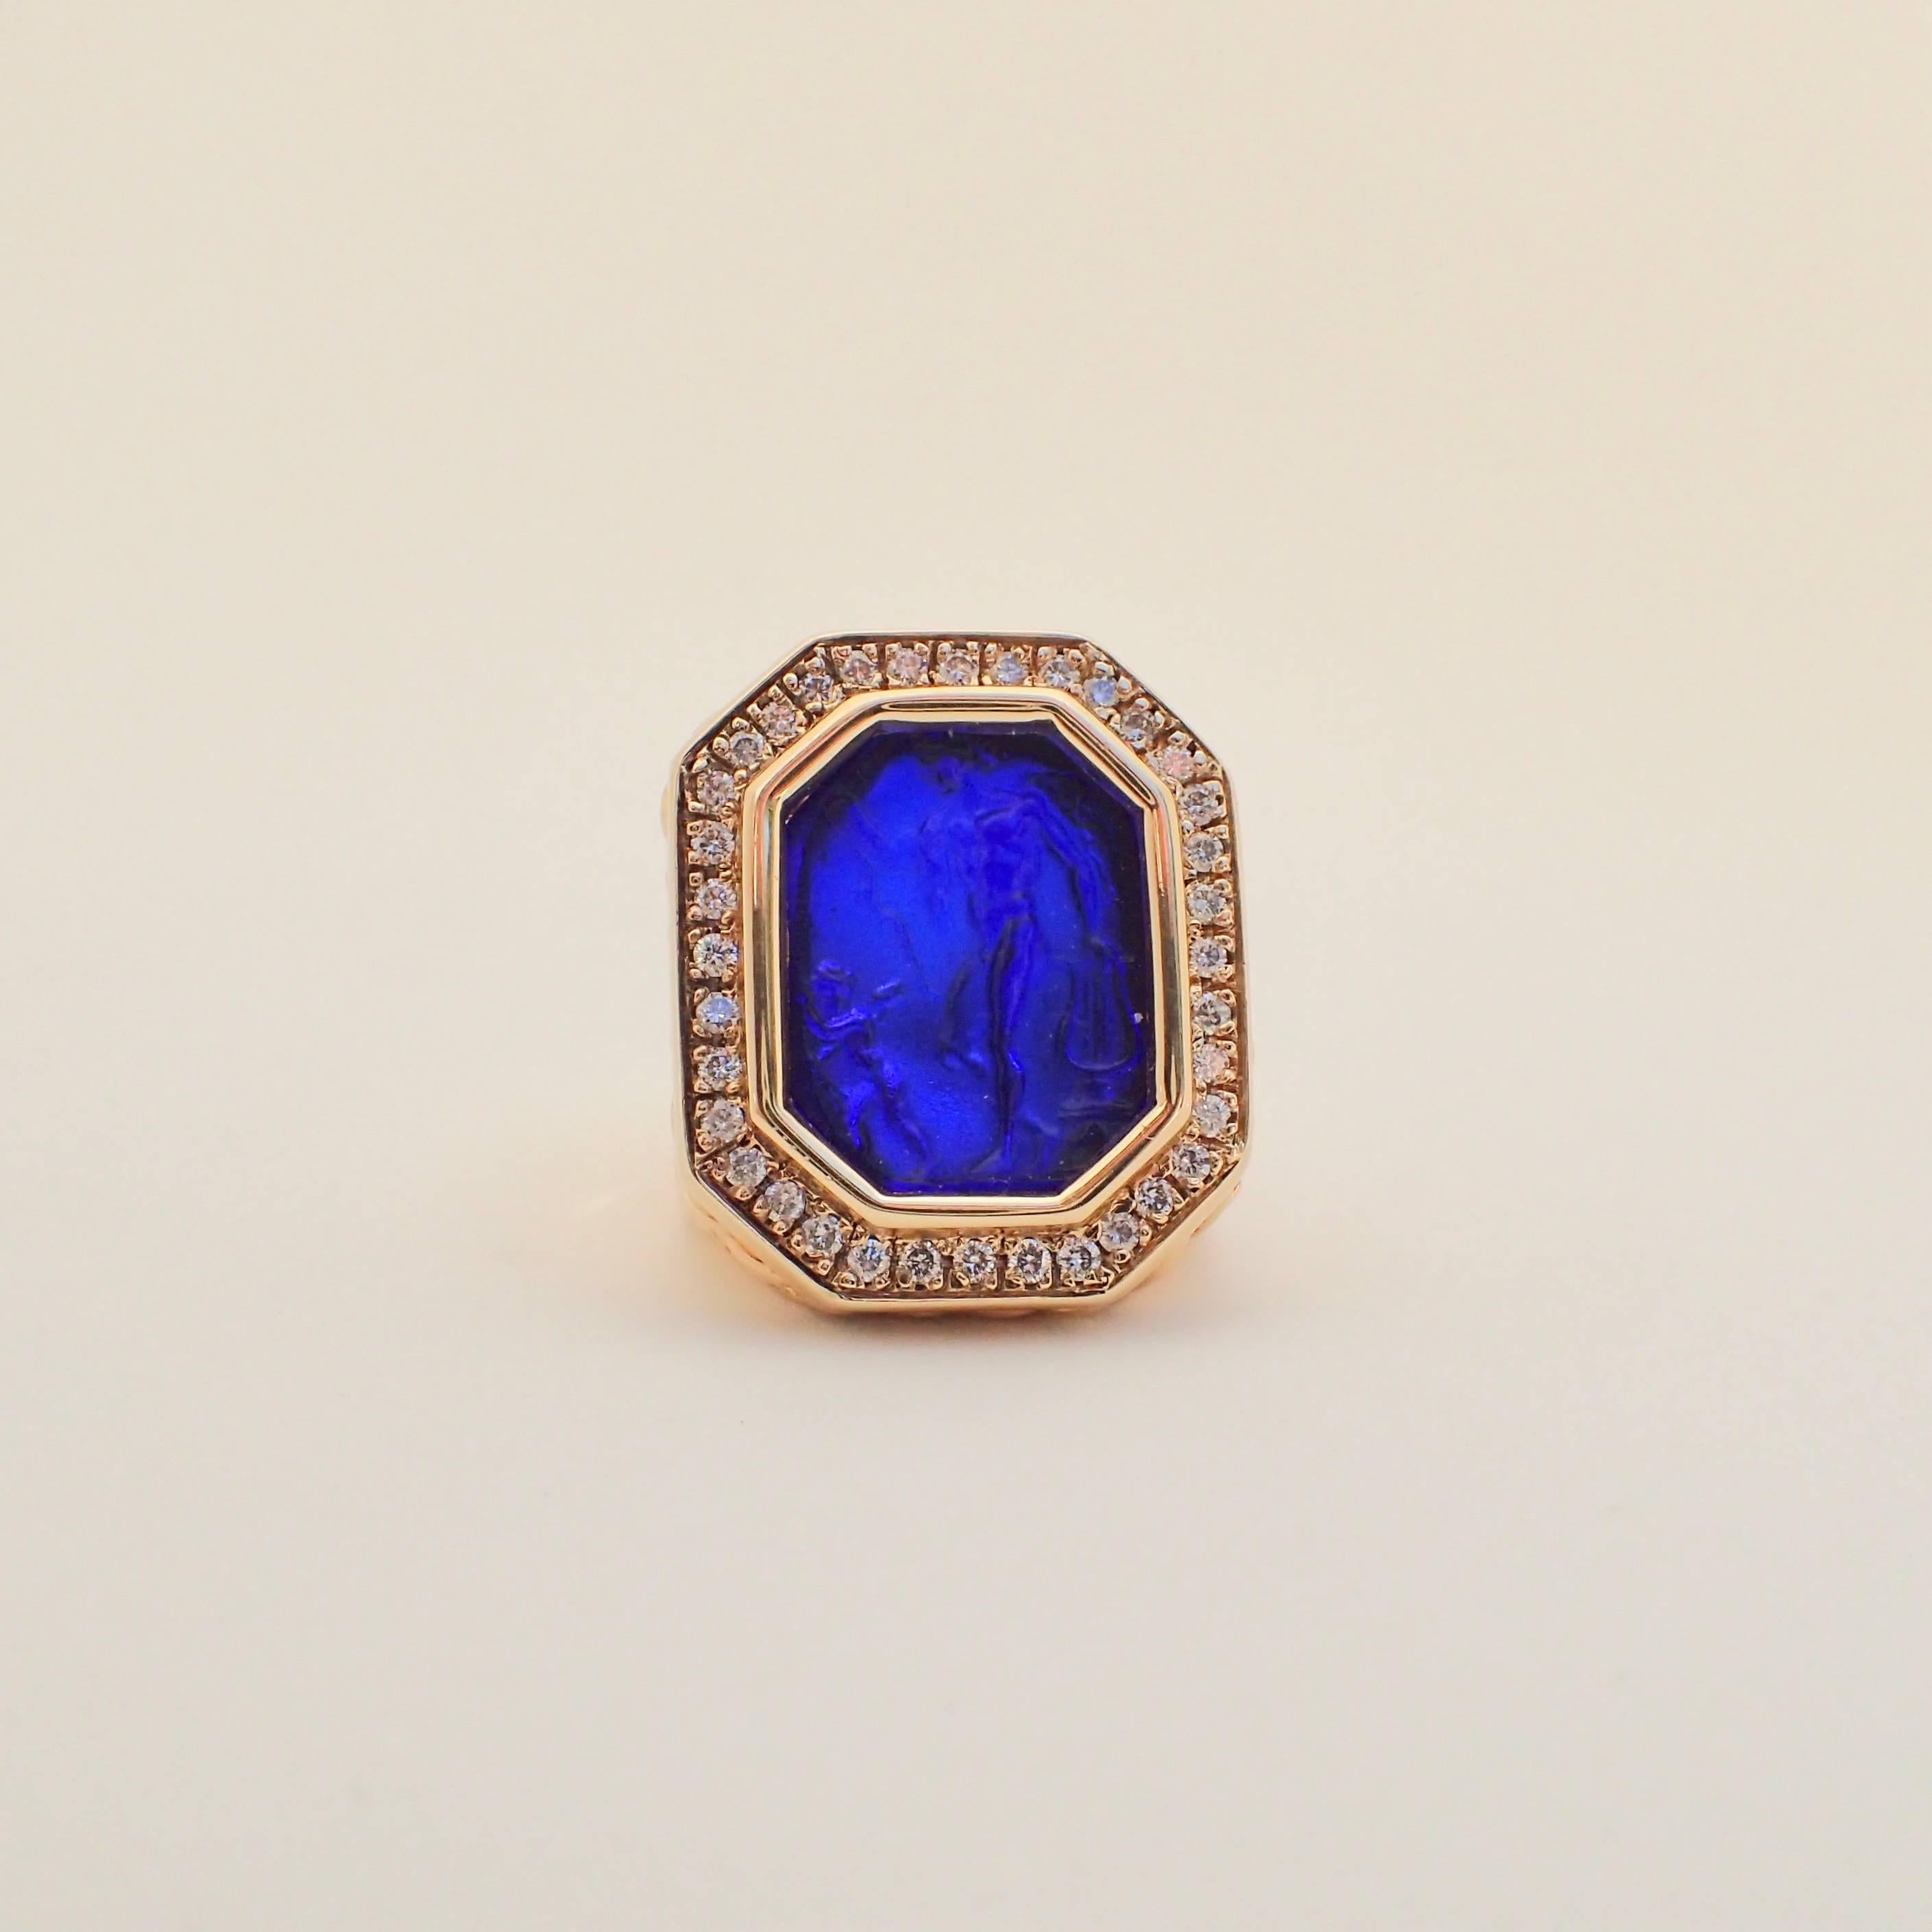 14 Karat Gold Hammered Texture Blue Intaglio Ring with 0.43 Carat of Diamond For Sale 7